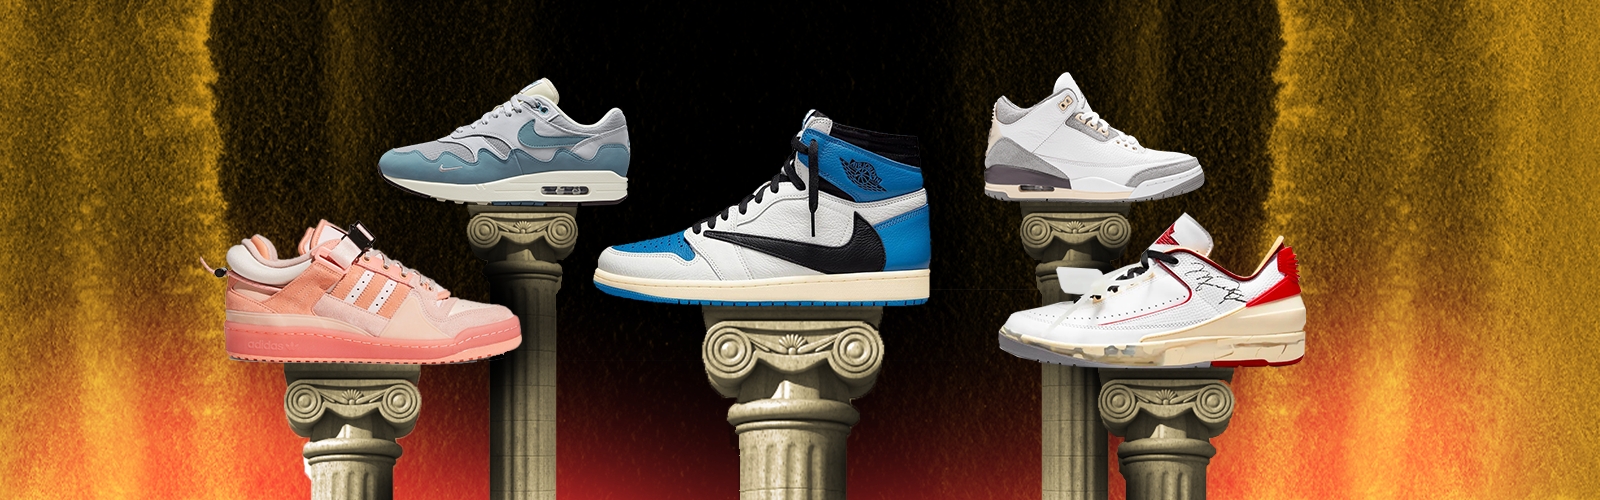 Drake is a certified sneakerhead and these are his best kicks